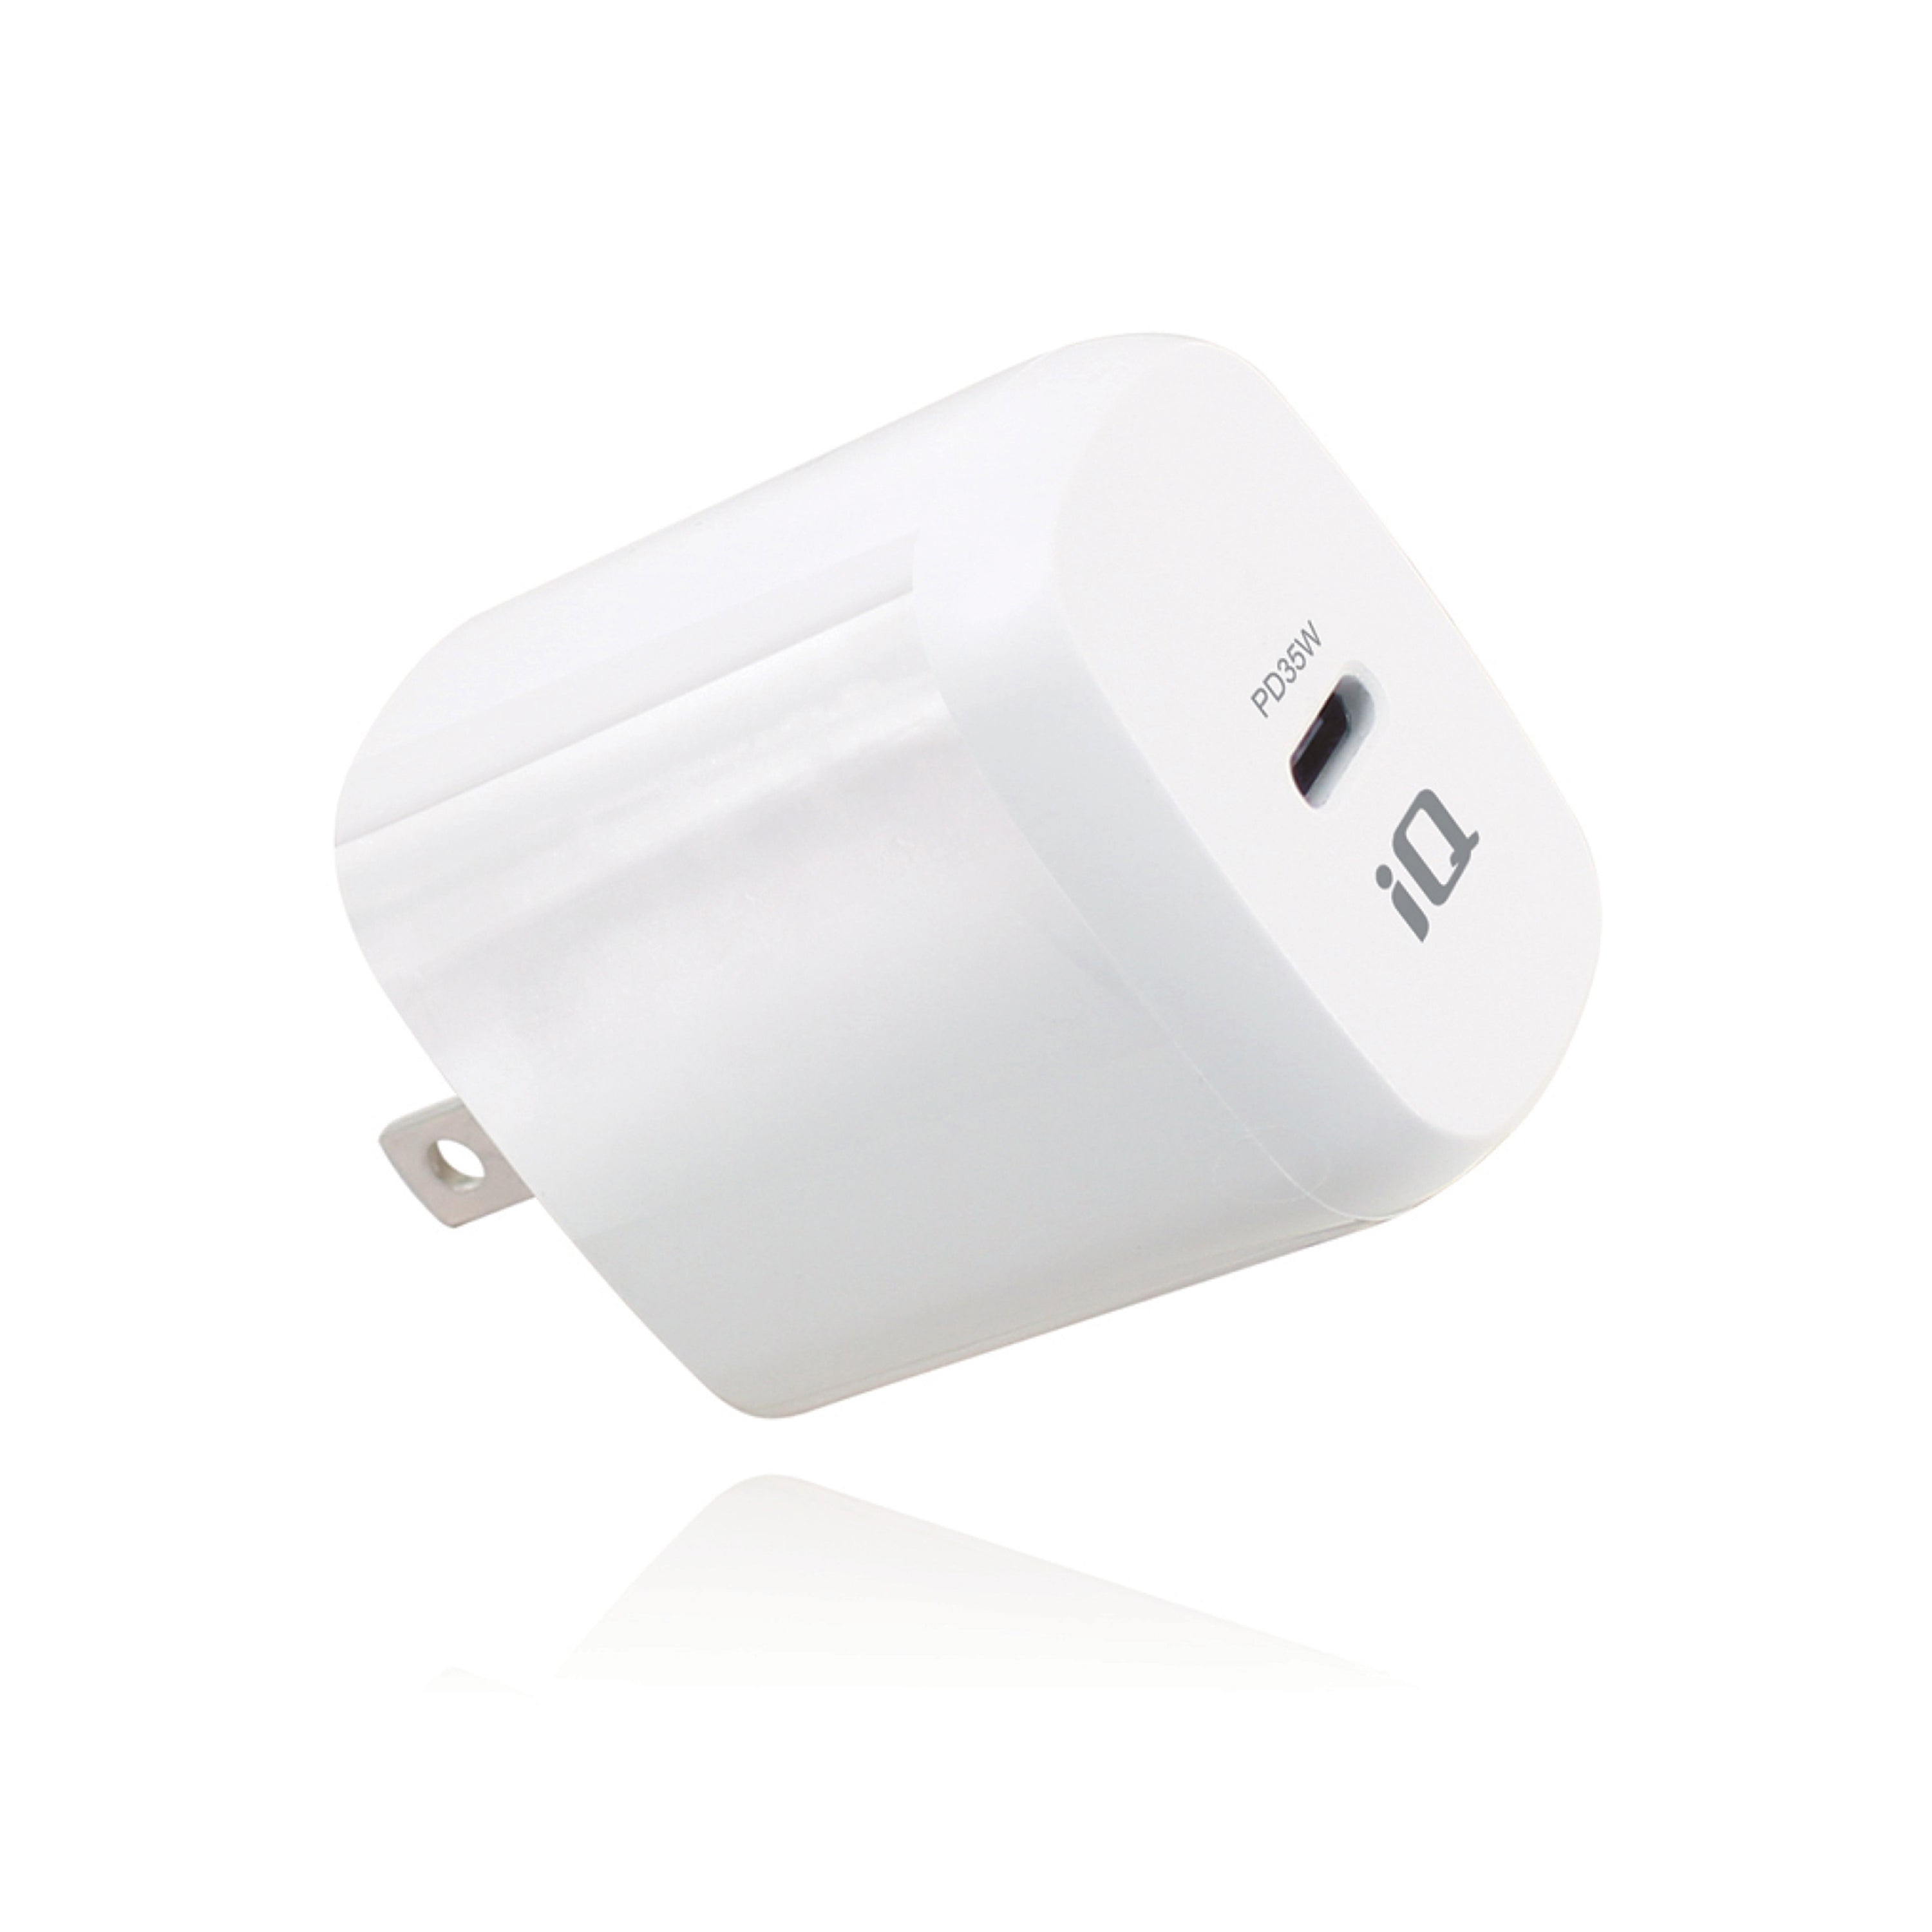 iQ USB PD 35W Rapid Charge Wall Charger, White, Fixed Prongs